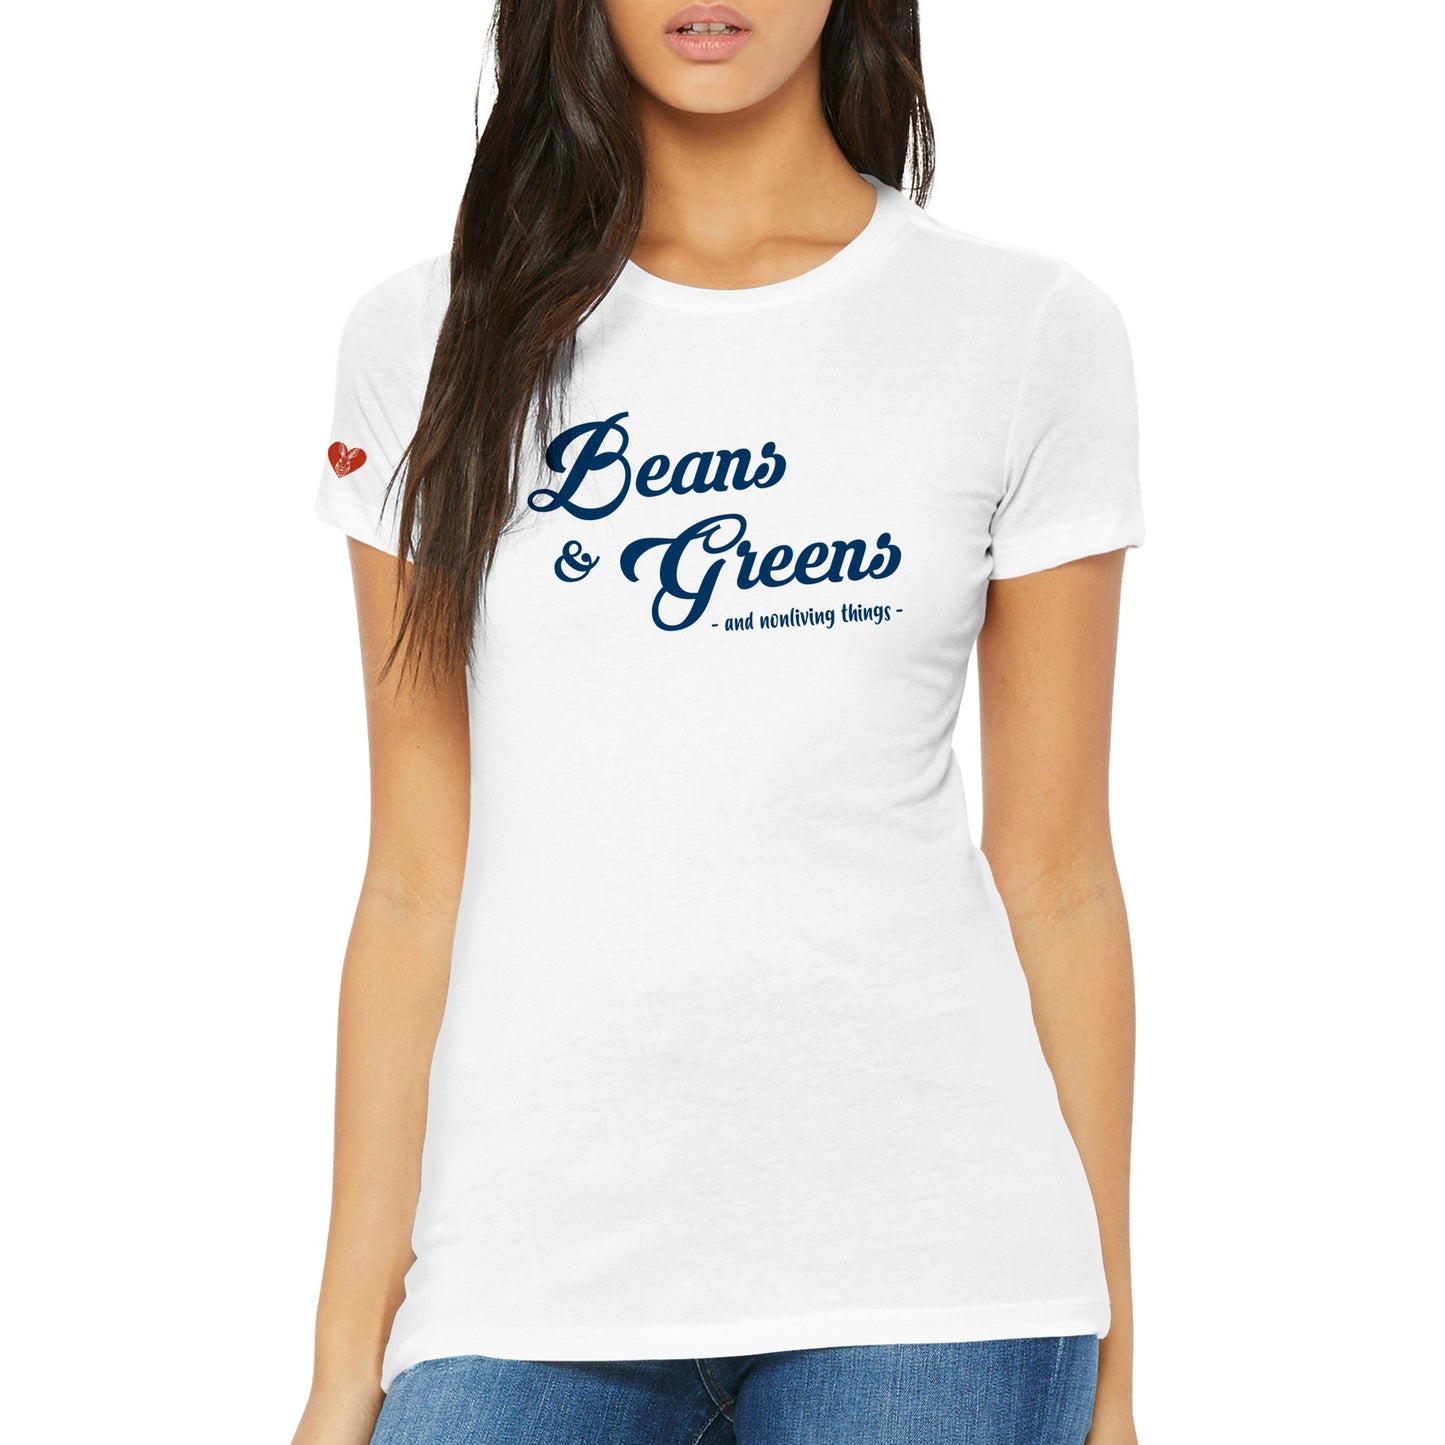 Beans & Greens - Womens style (Women's run small - get one size up from normal unisex)